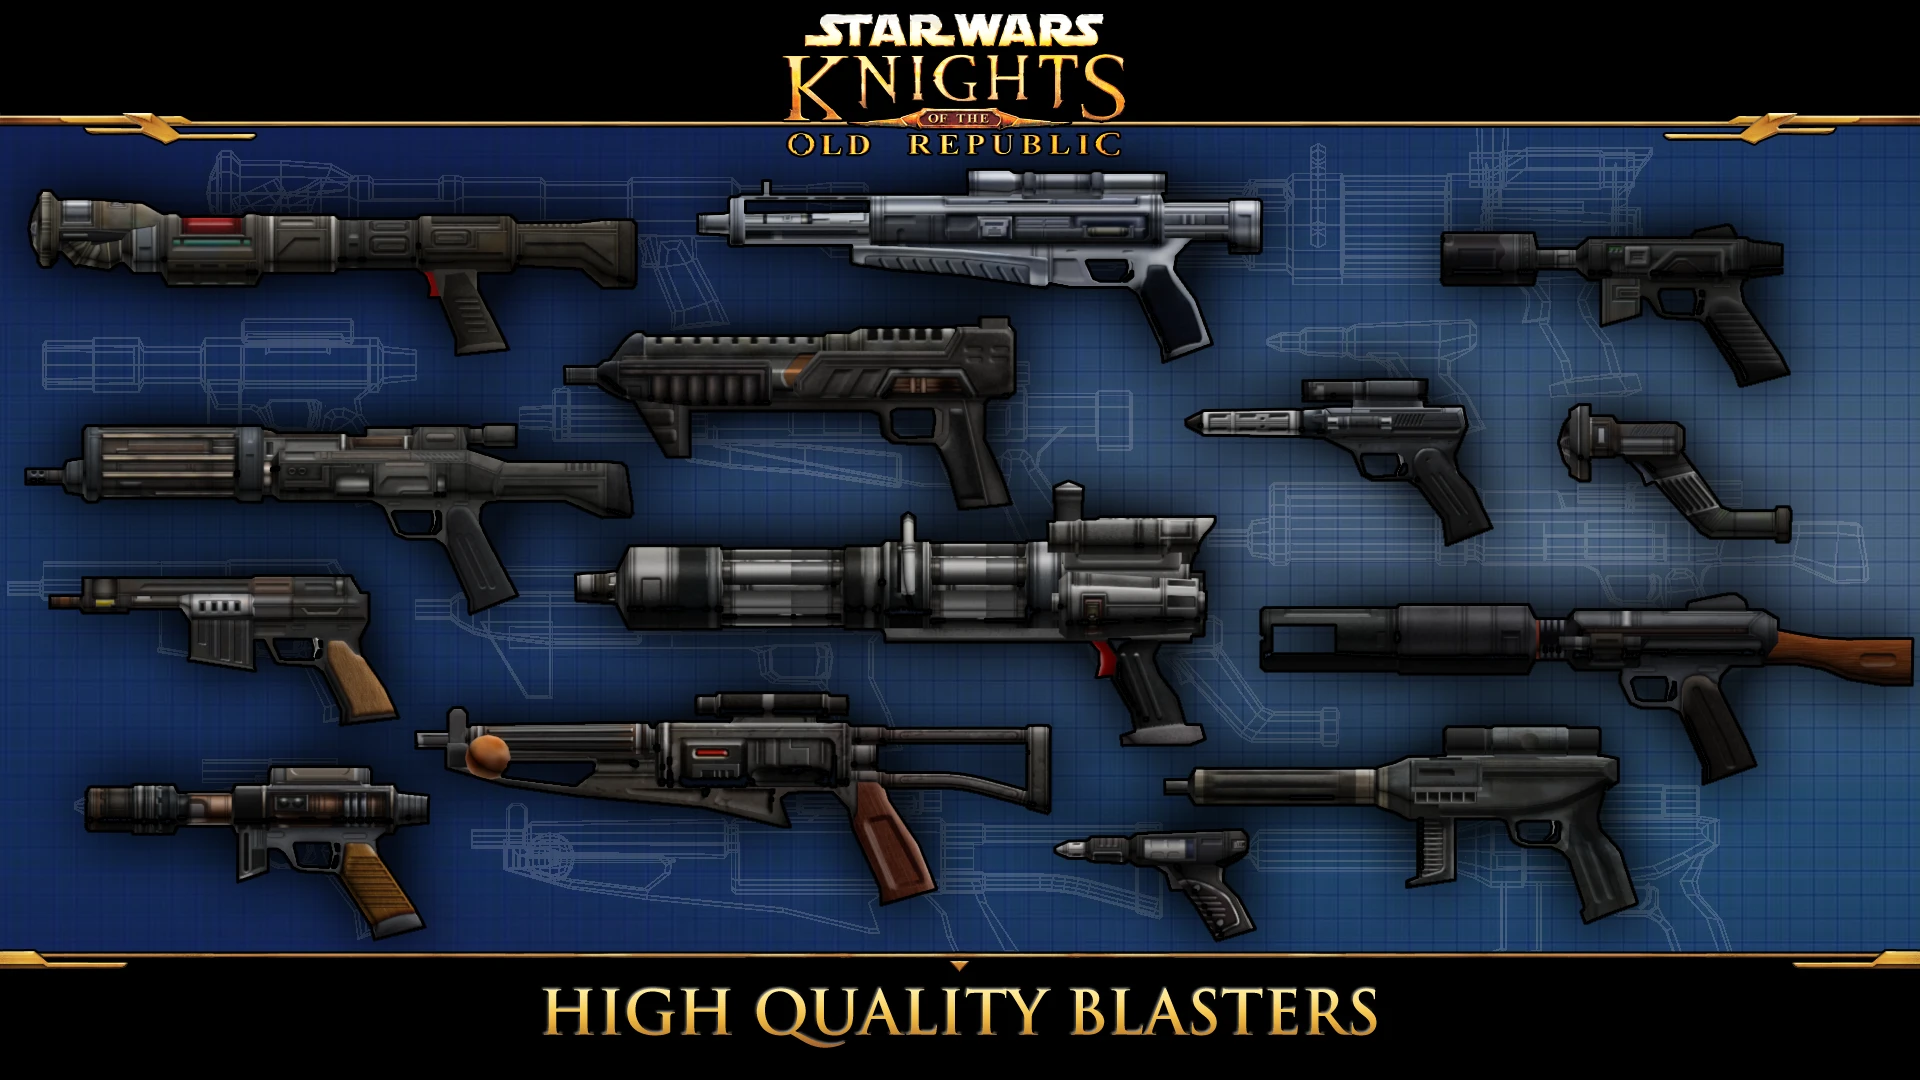 knights of the old republic sith academy